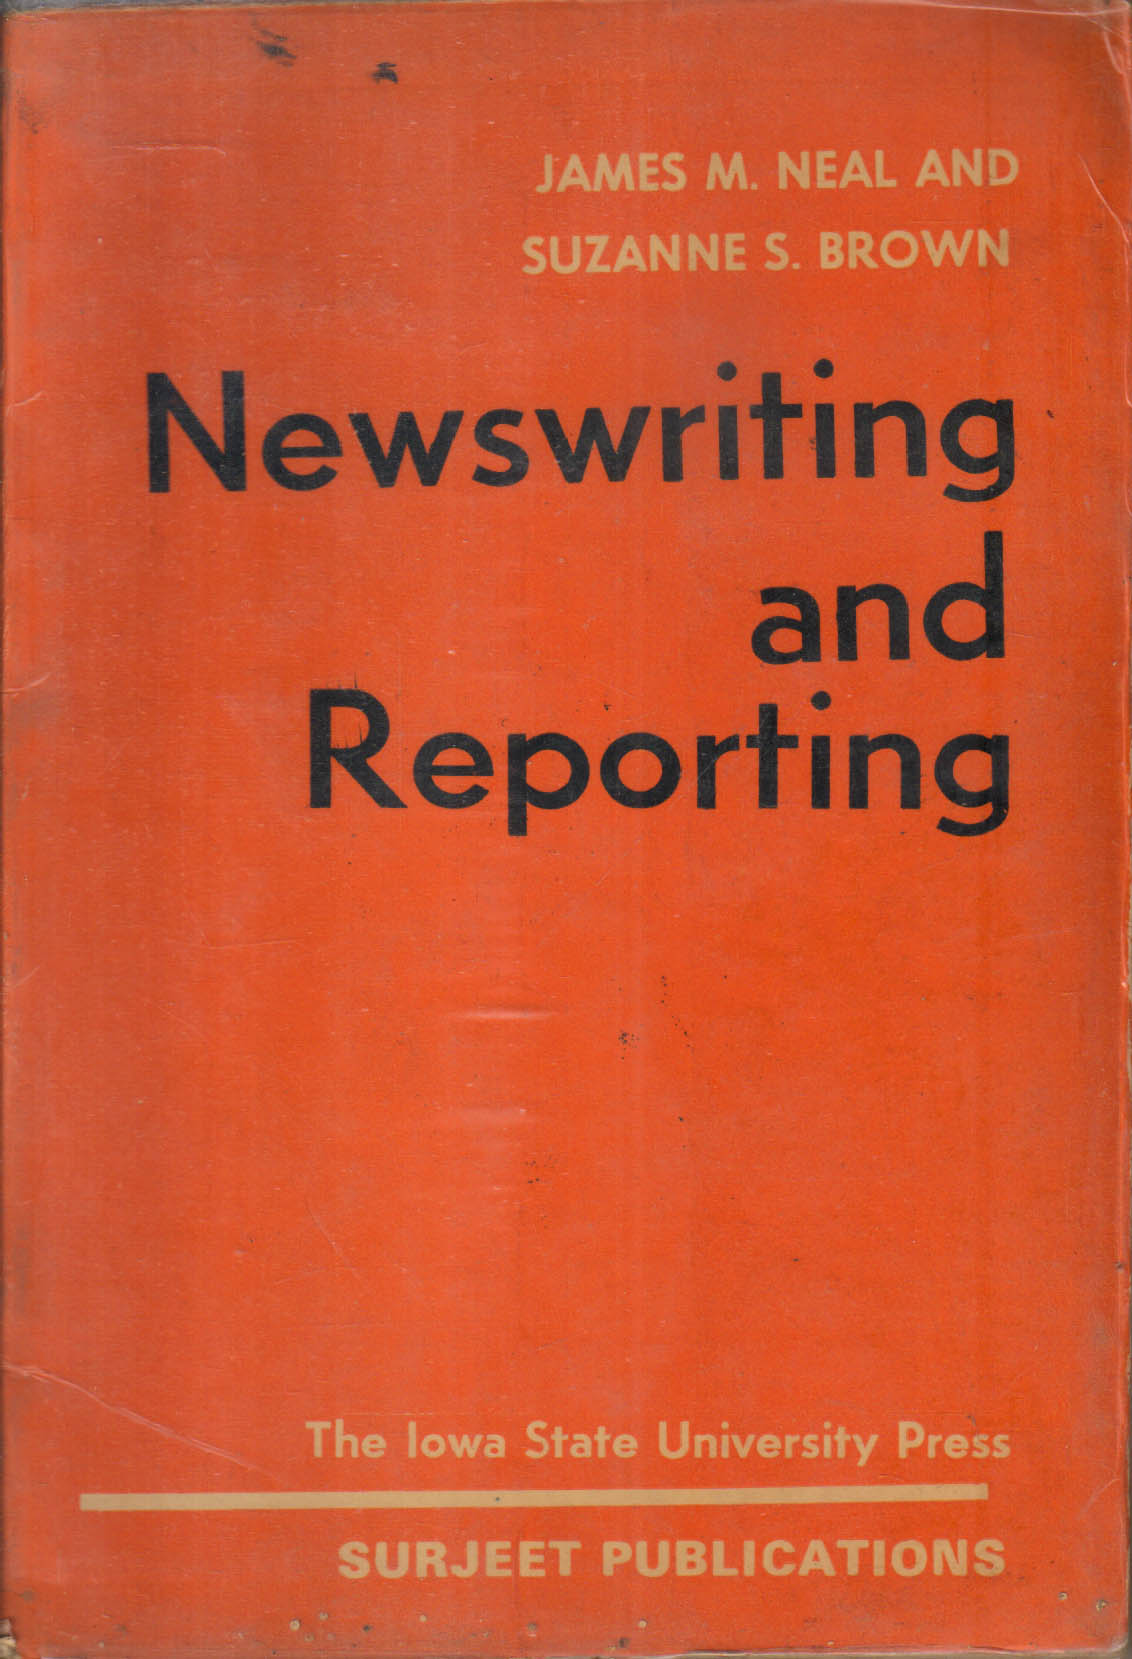 Newswriting and Reporting